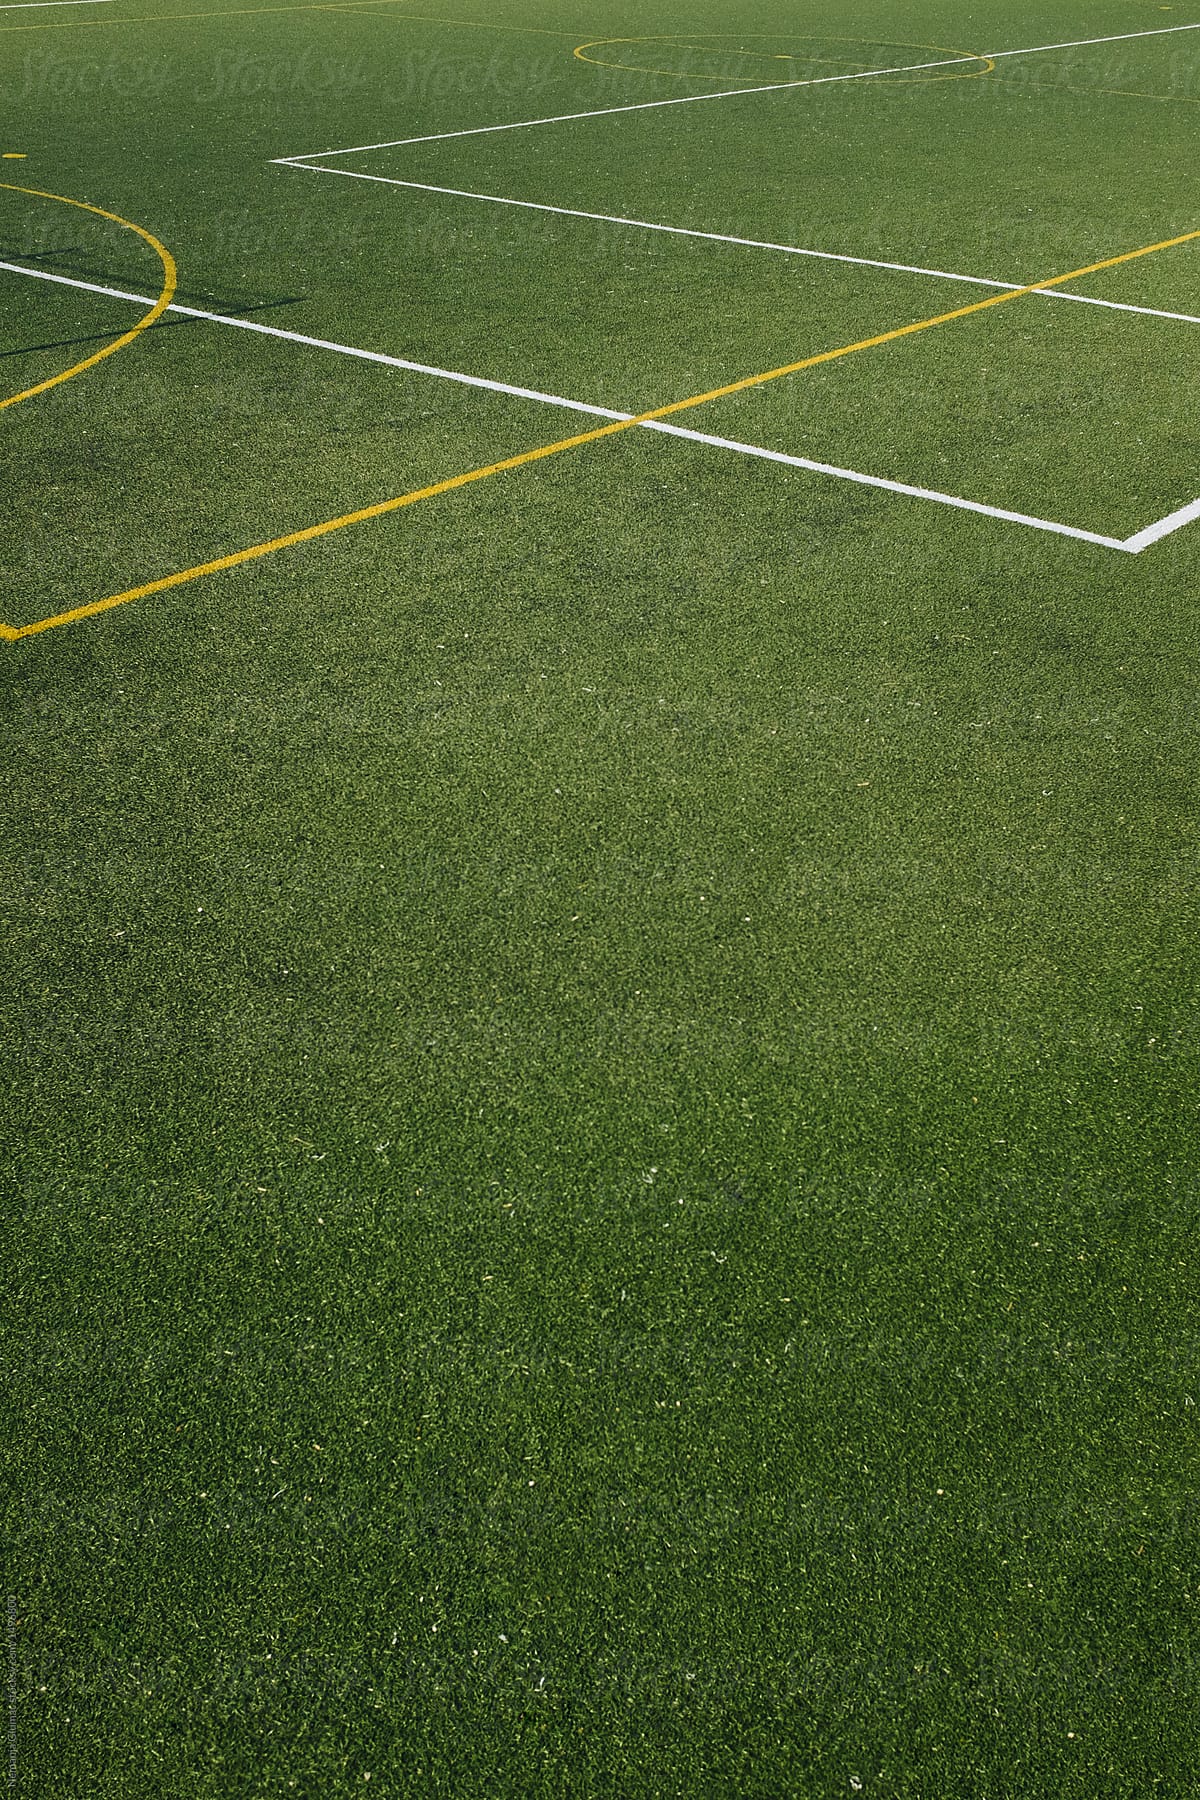 Detail of Grass Footbal Field With Copy Space